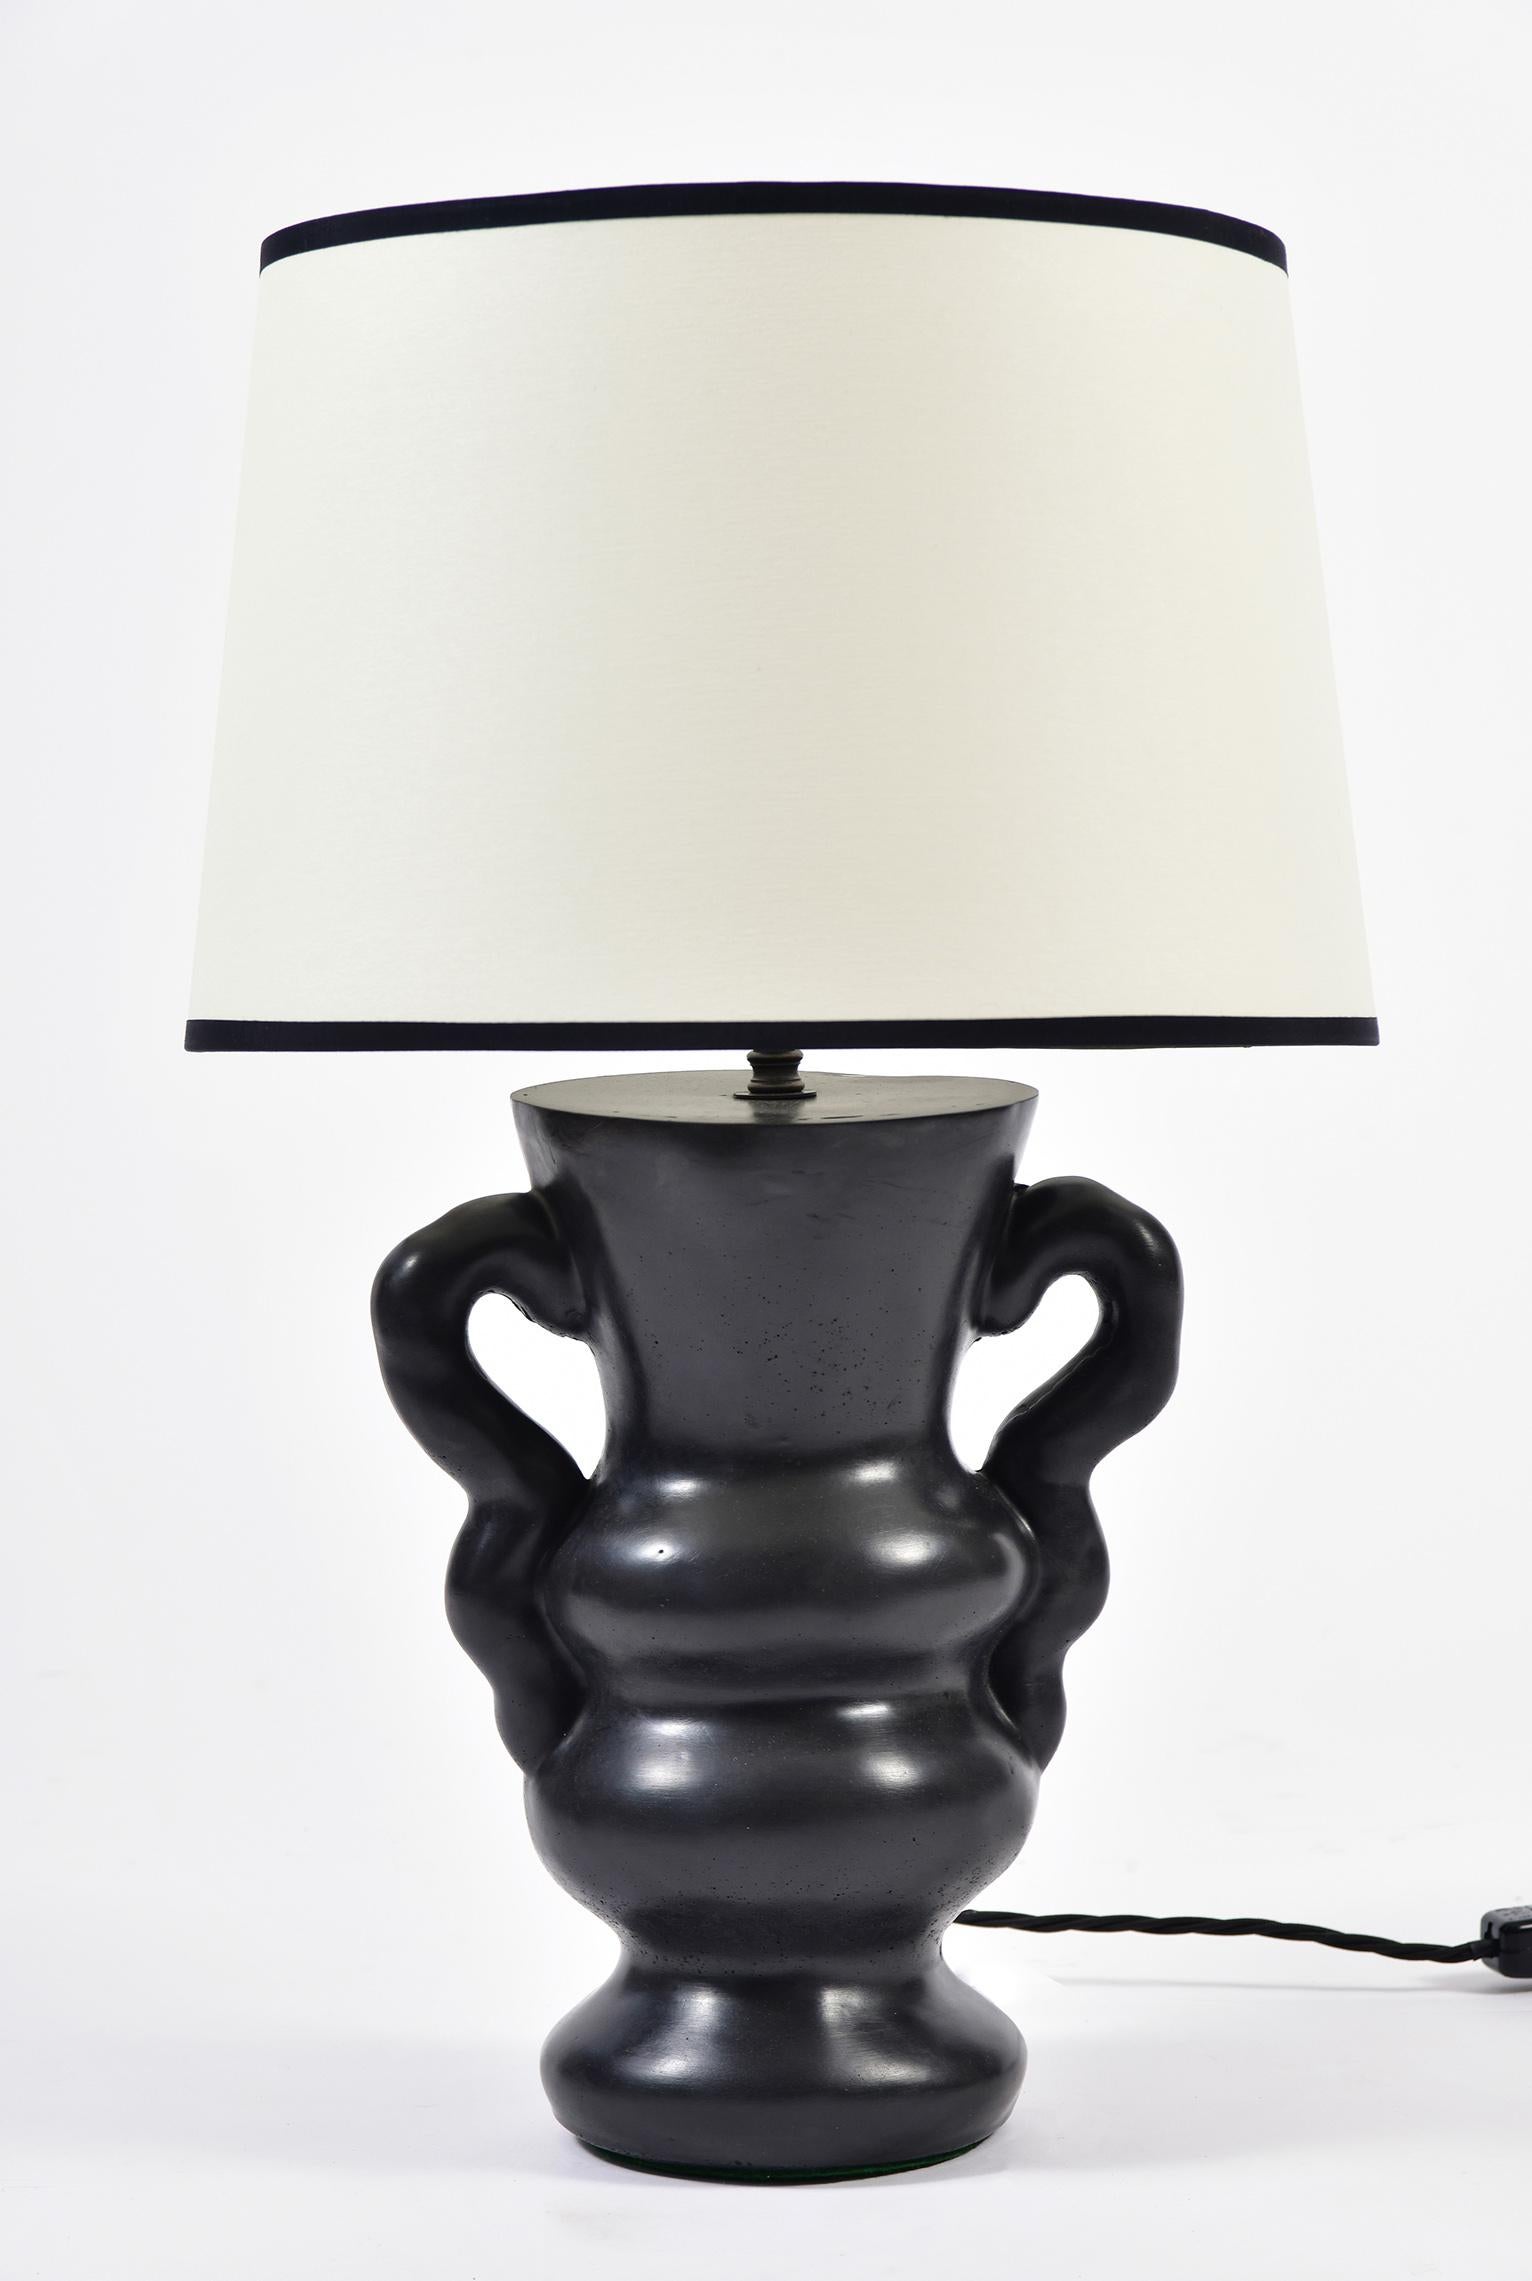 Contemporary Pair of Black 'Ysolde' Polished Plaster Table Lamp, by Dorian Caffot de Fawes 